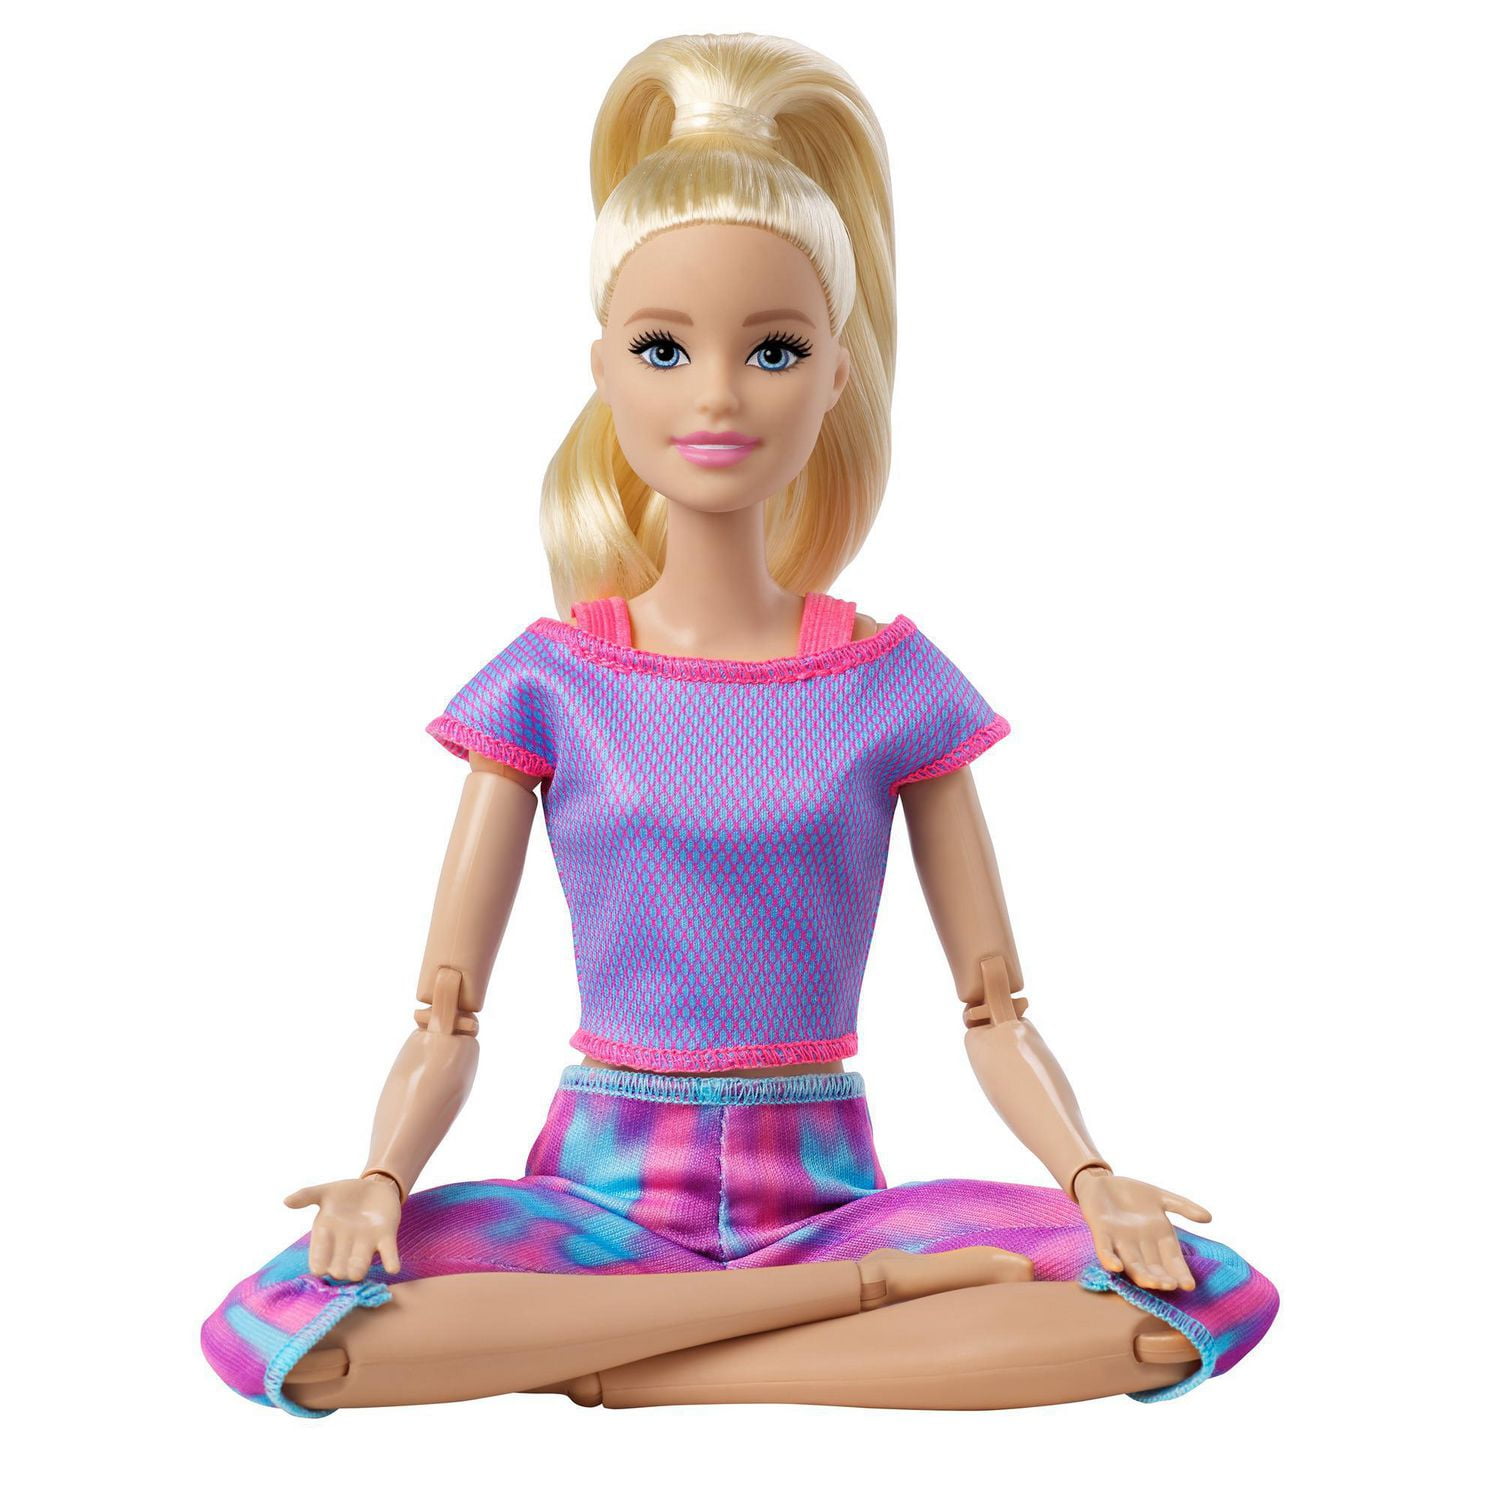 Barbie Looks Ken Doll with Black Hair Dressed in Purple Mesh Top and Pink  Trousers, Posable Made to Move Body